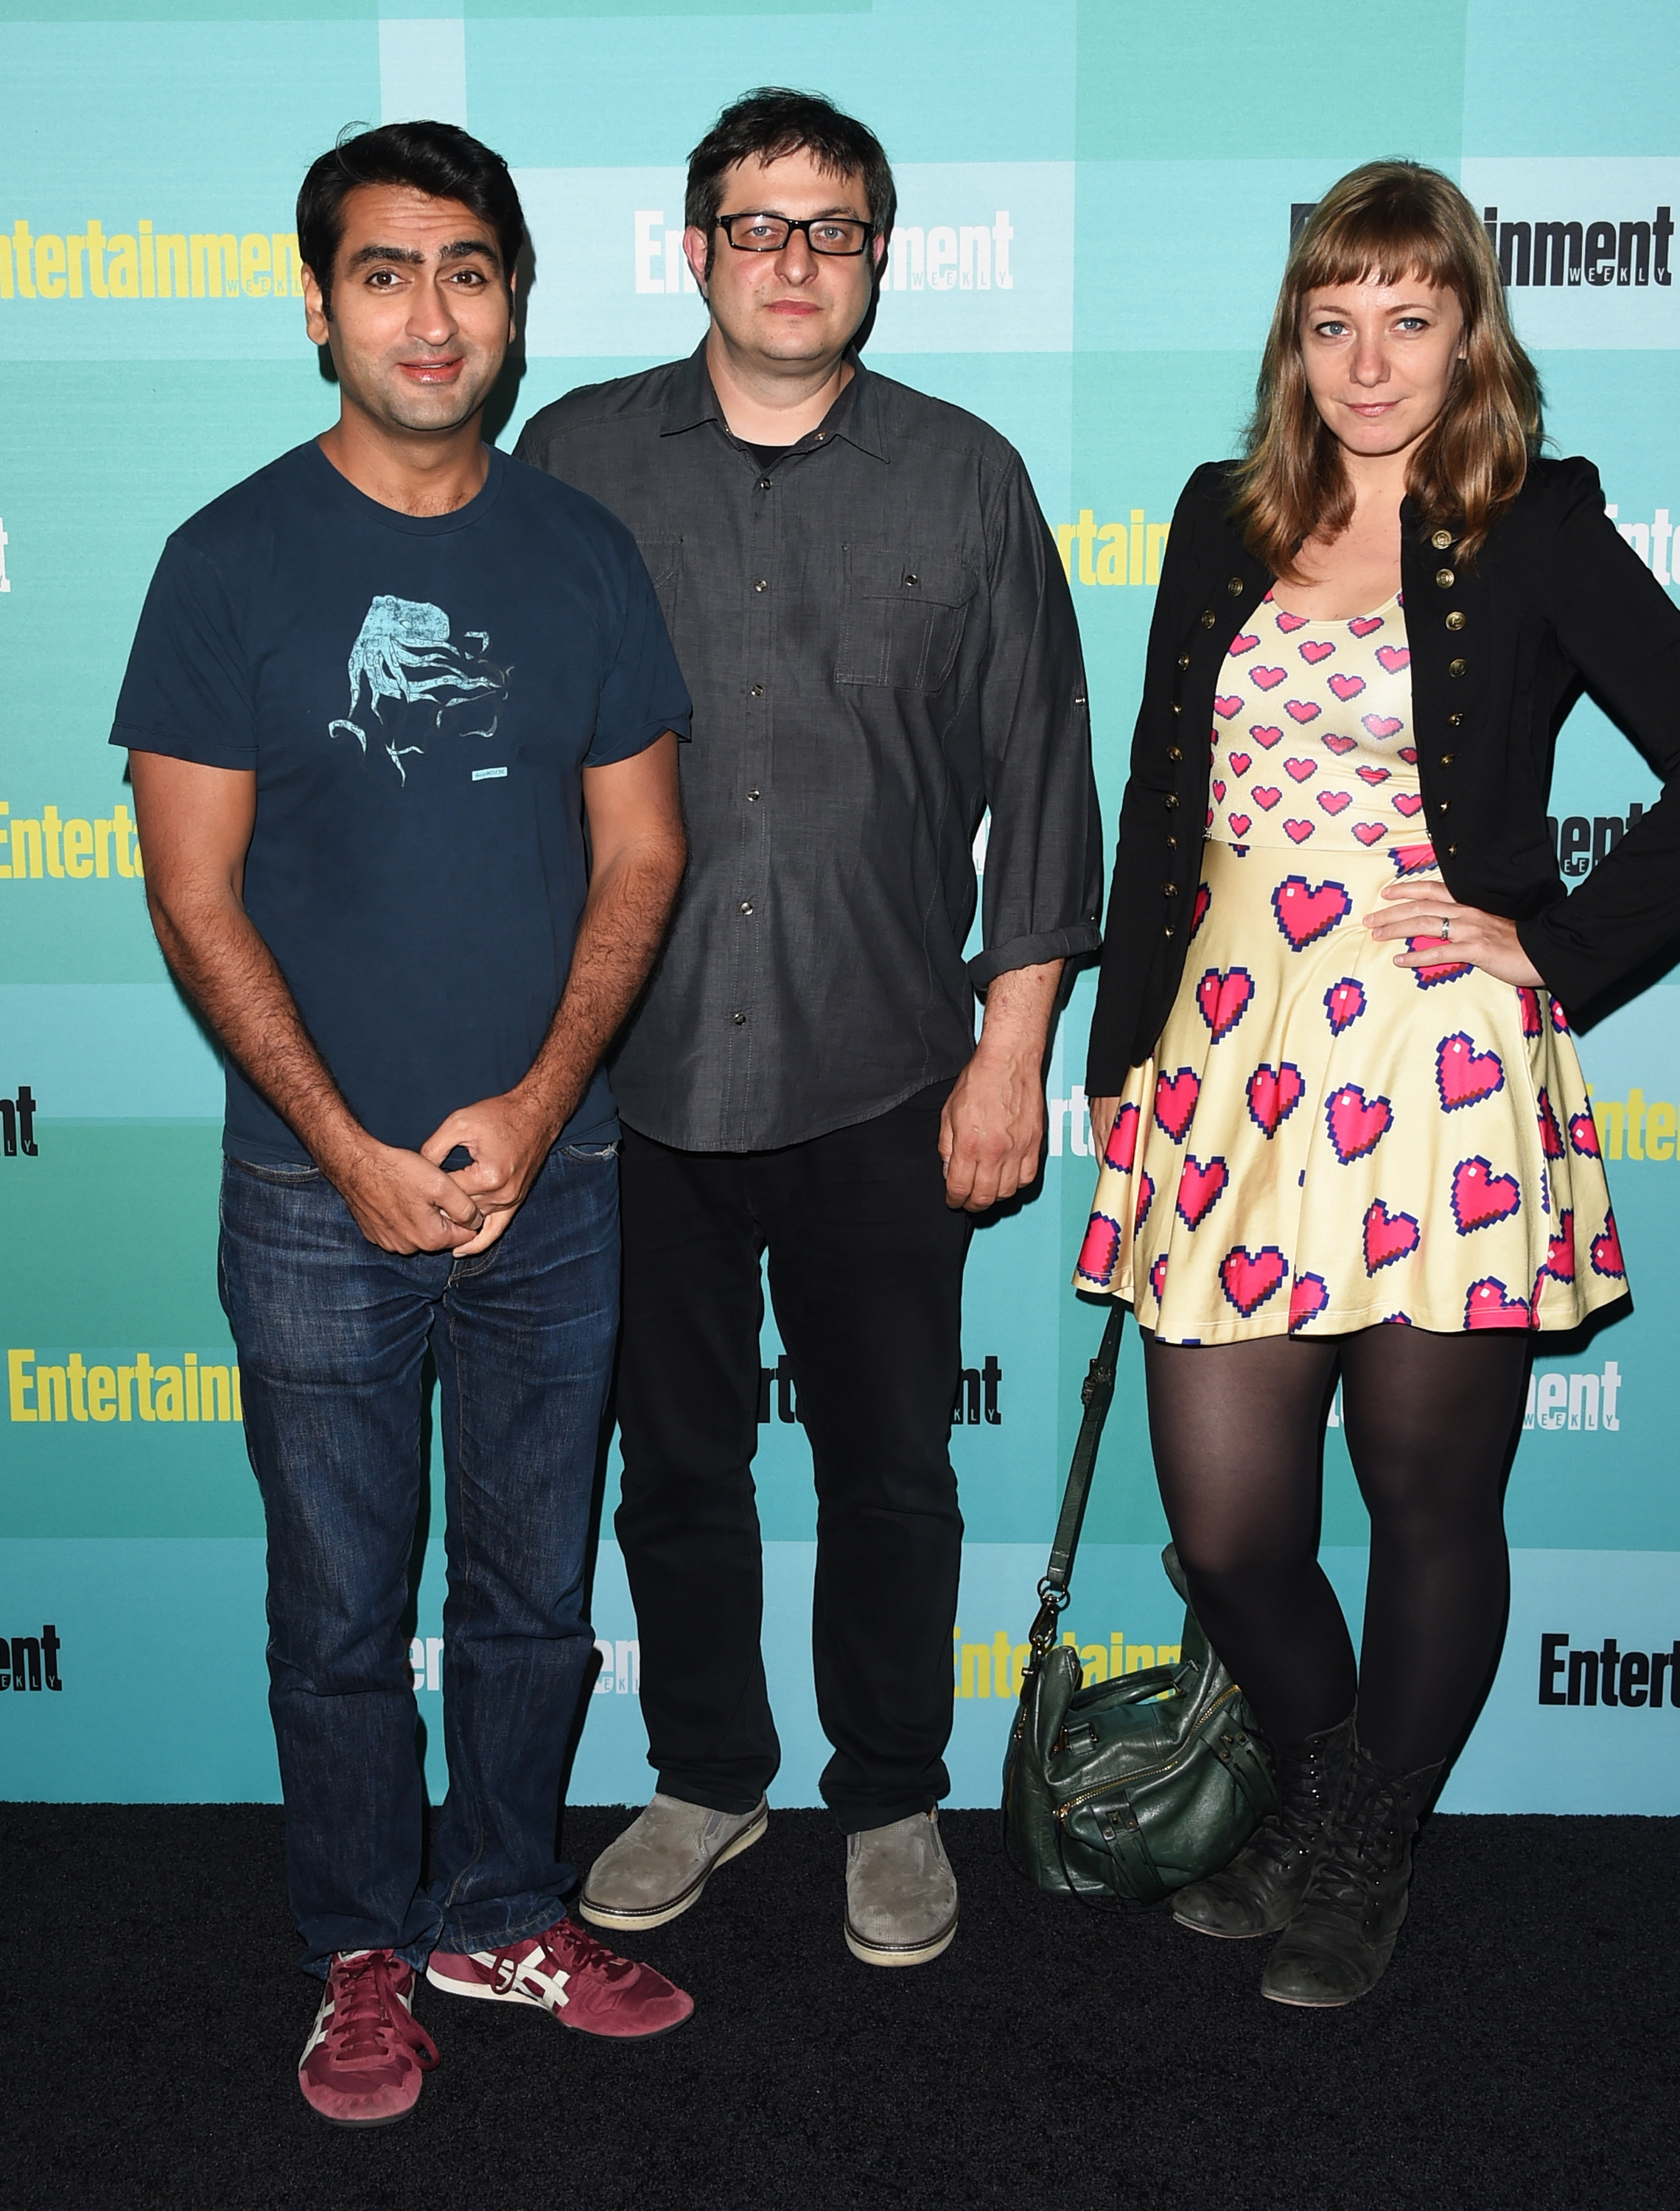 Left to right, Kumail Nanjiani, Eugene Mirman and writer/producer Emily V. Gordon arrive at the Entertainment Weekly celebration at The Hard Rock Hotel in San Diego on July 11, 2015.